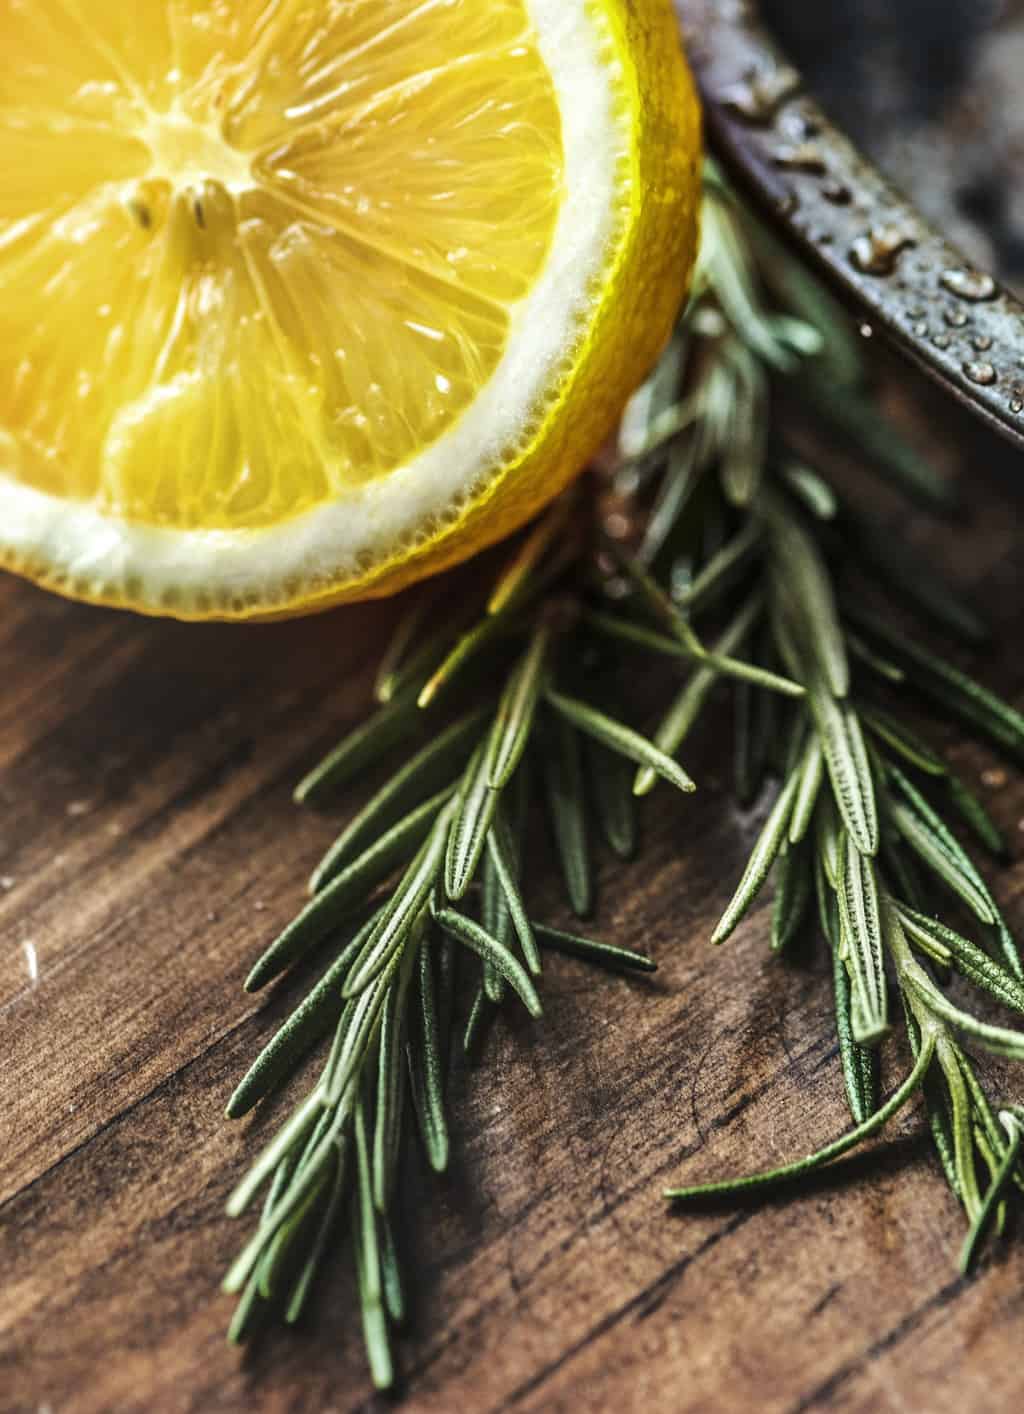 Rosemary sprigs with a sliced citrus fruit.